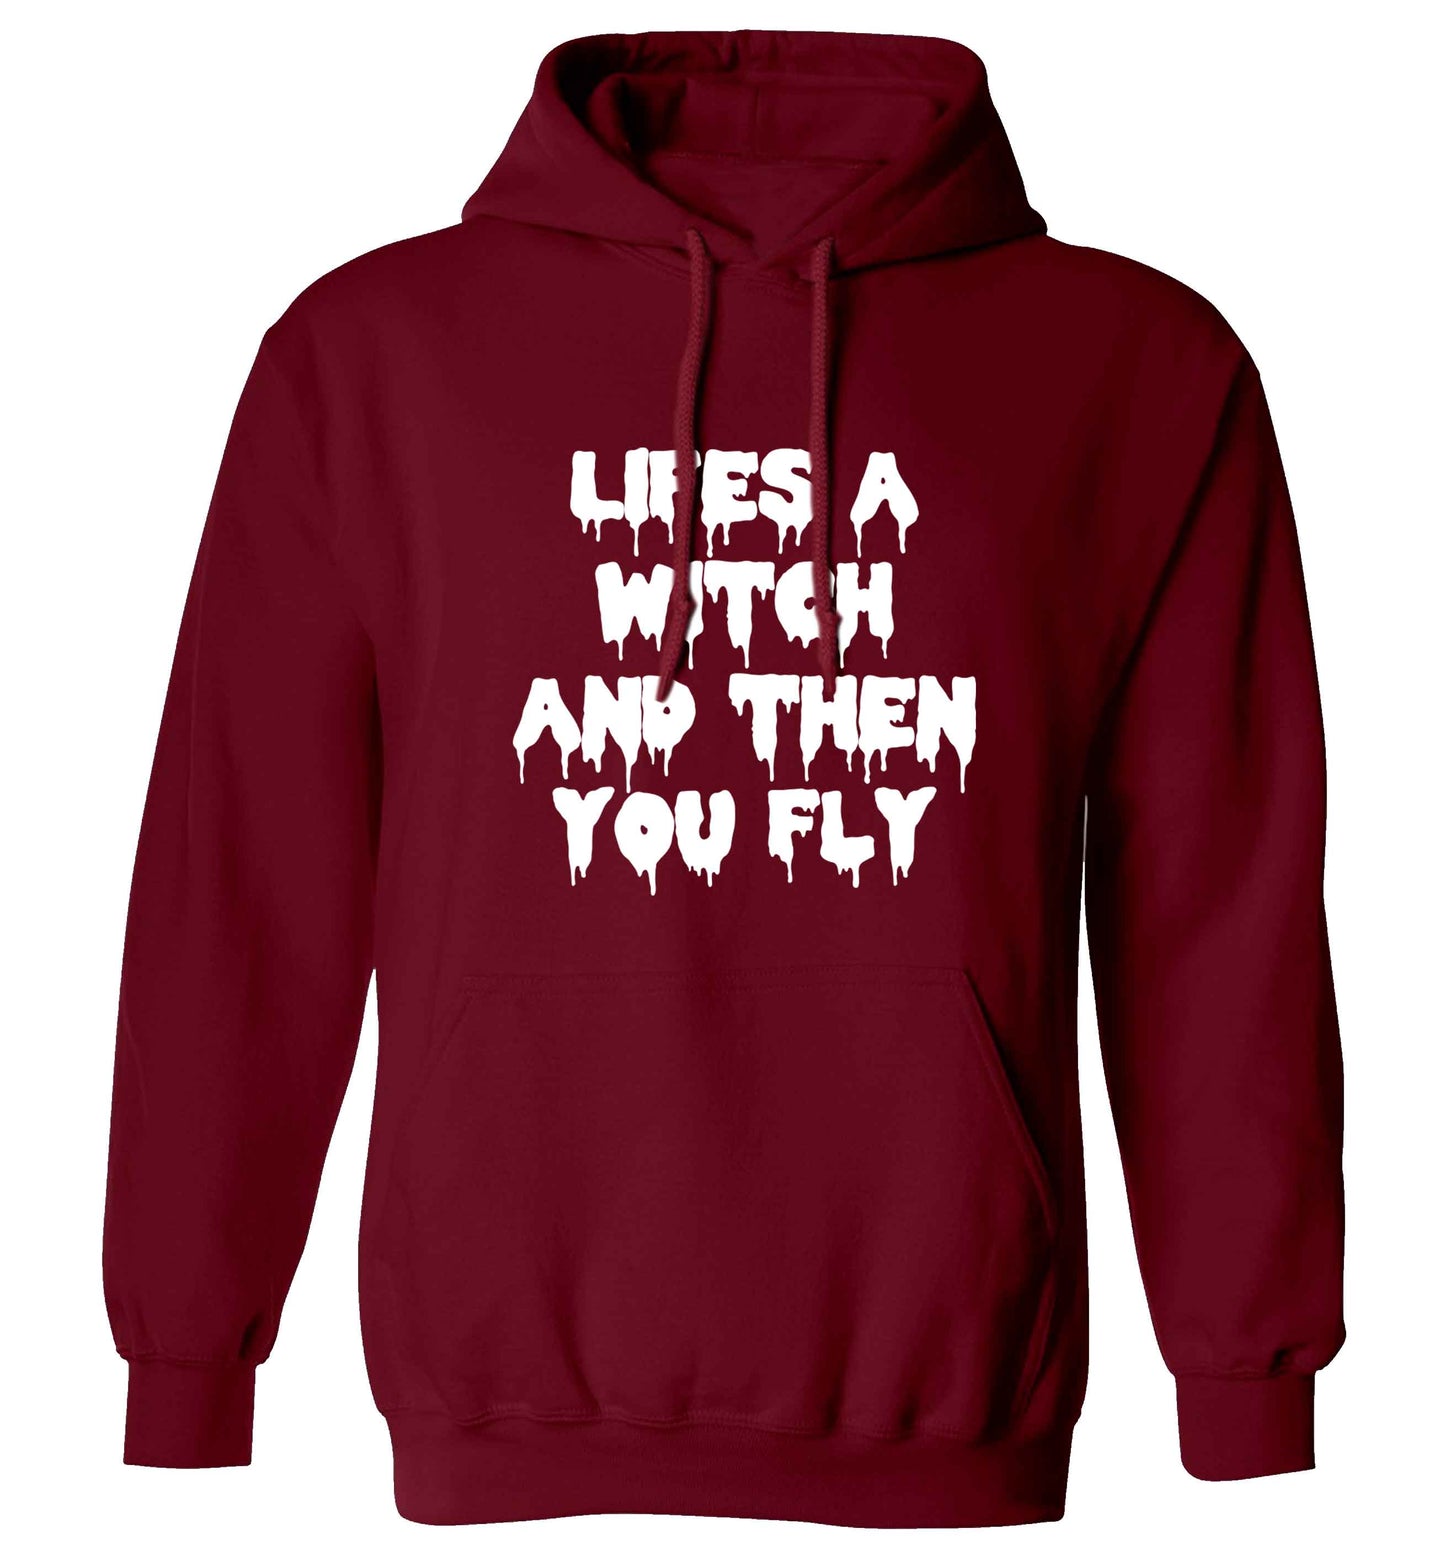 Life's a witch and then you fly adults unisex maroon hoodie 2XL